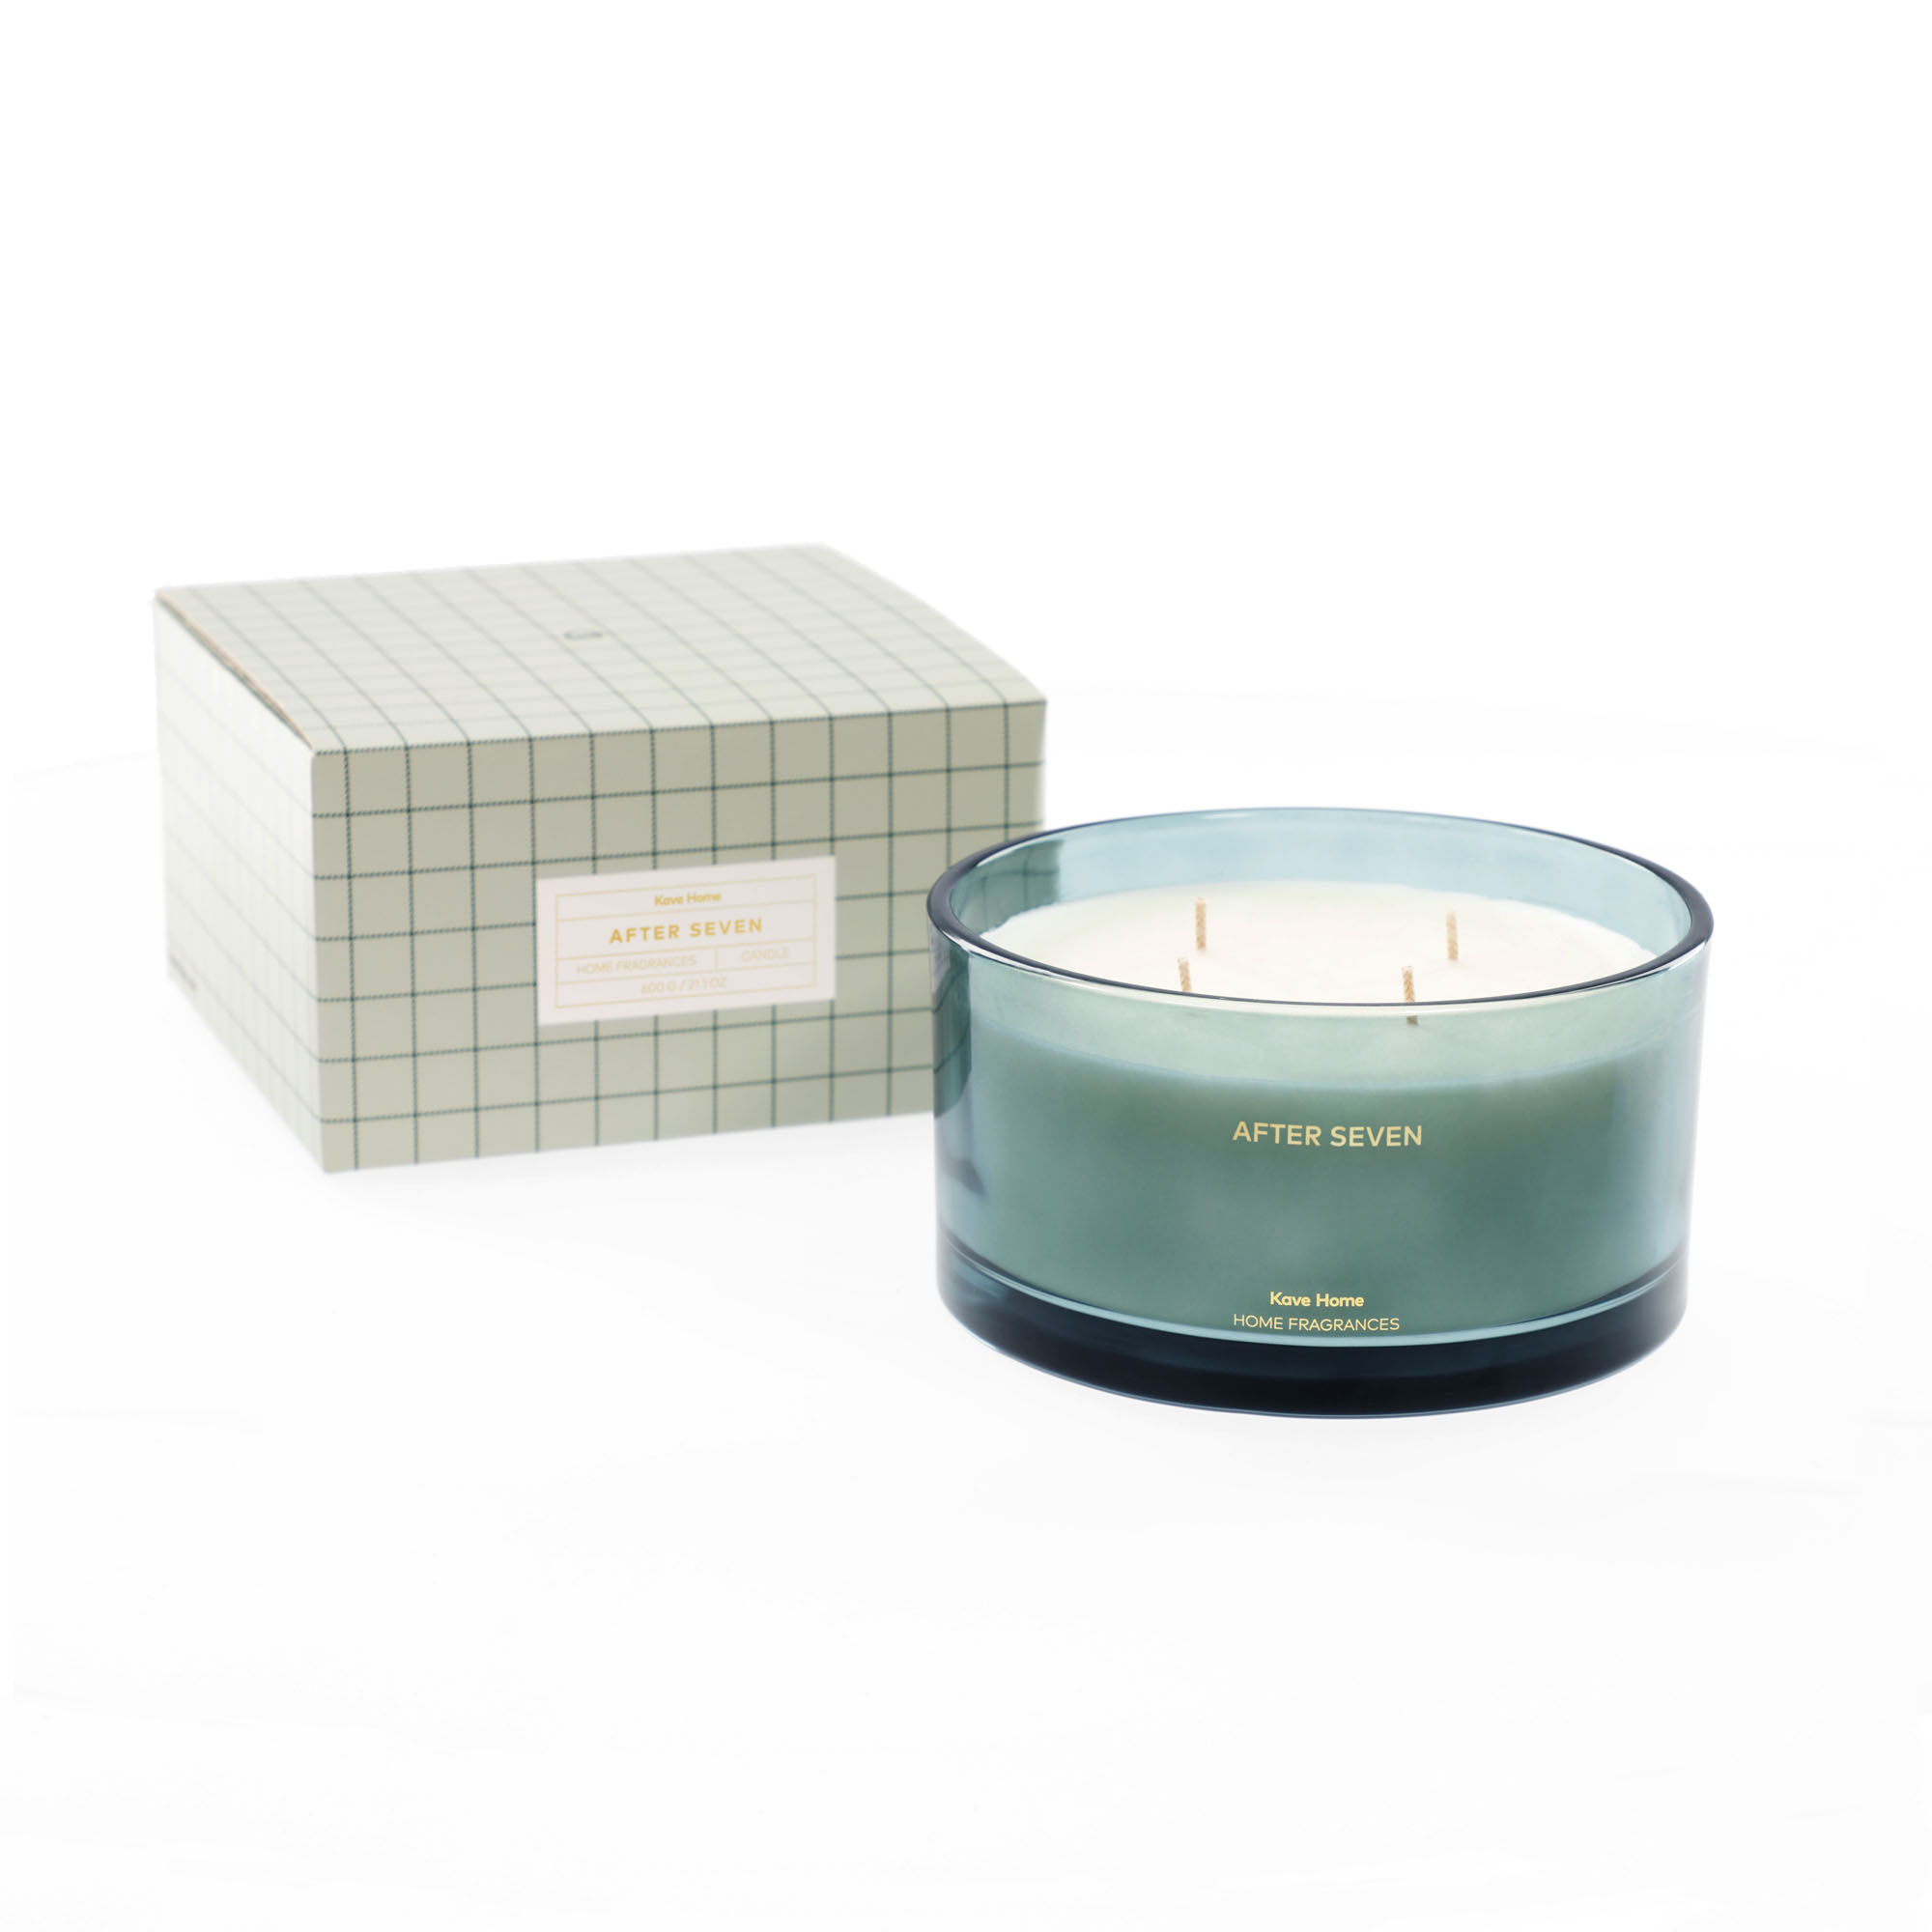 Kave Home After Seven scented candle 600 g